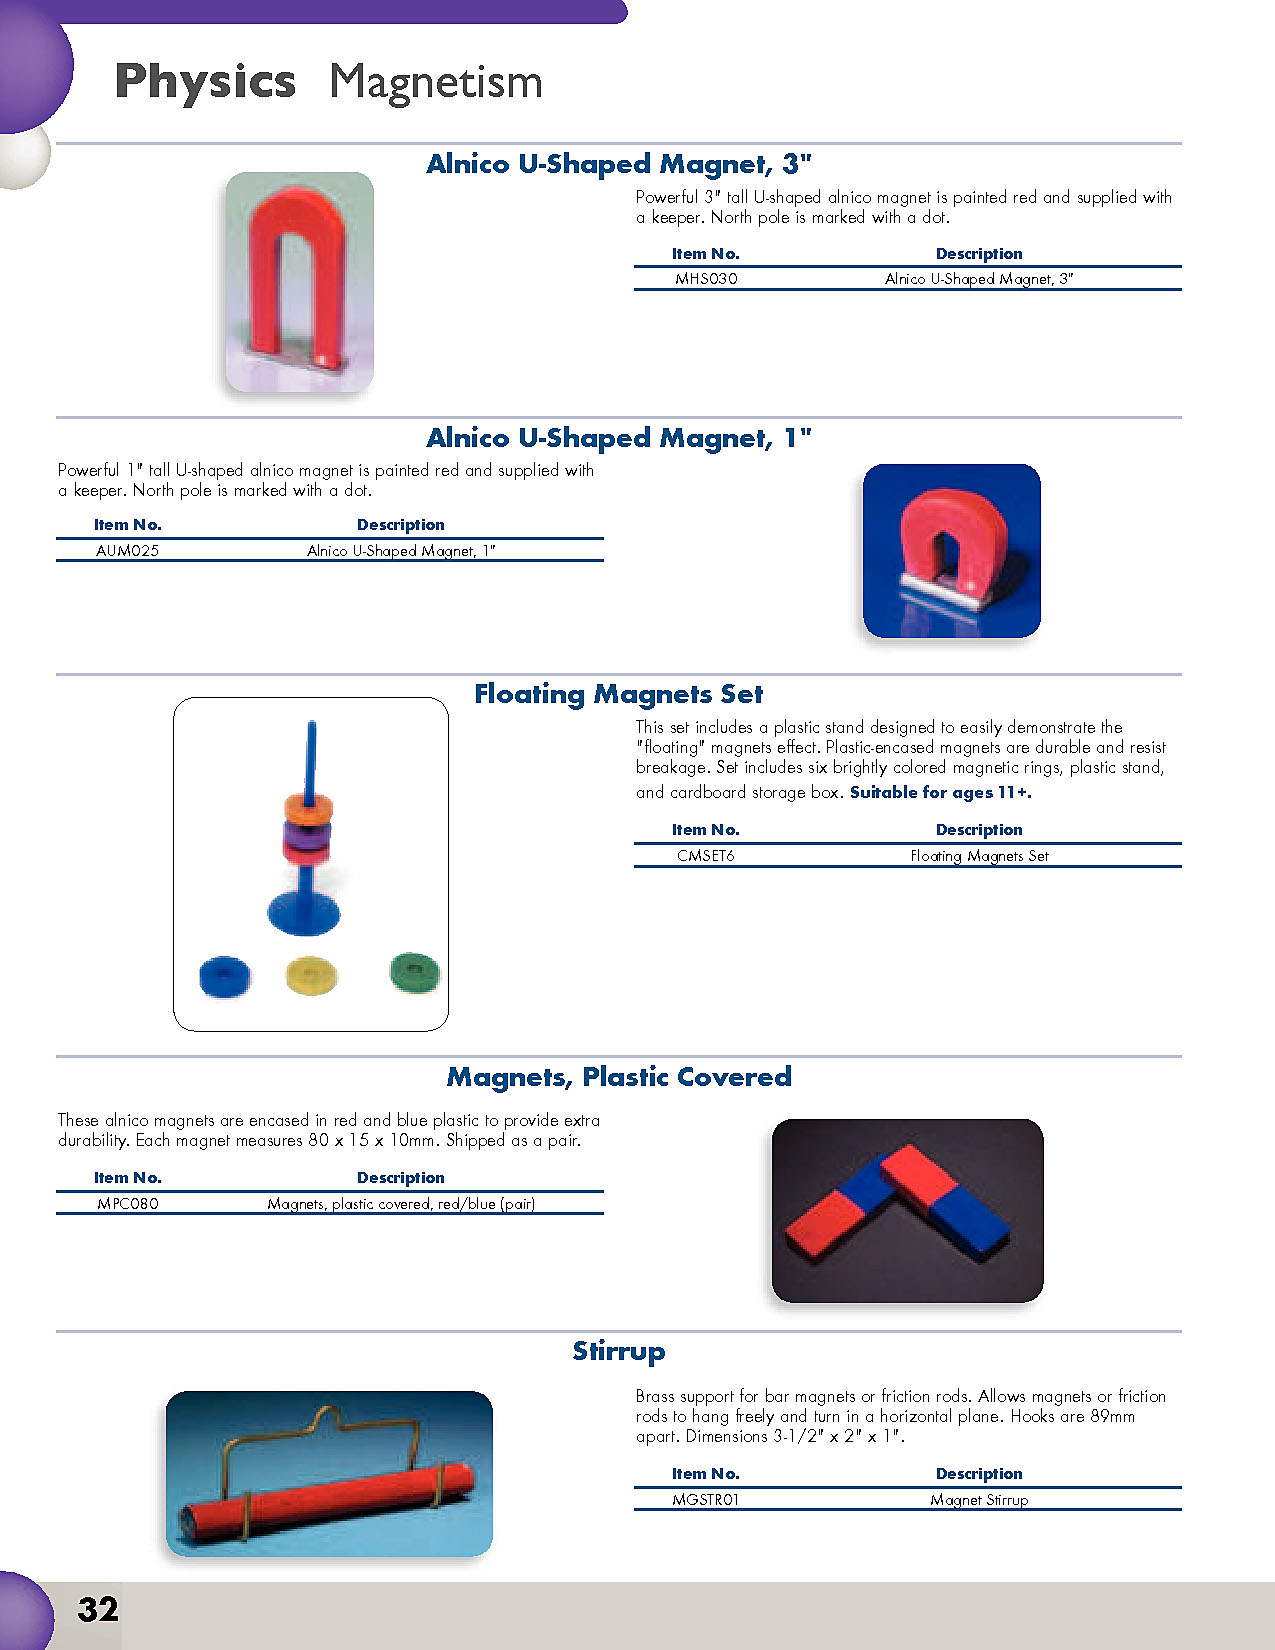 U-shaped with Red and Blue Logo - Alnico U Shaped Magnet, 3: Science Physics